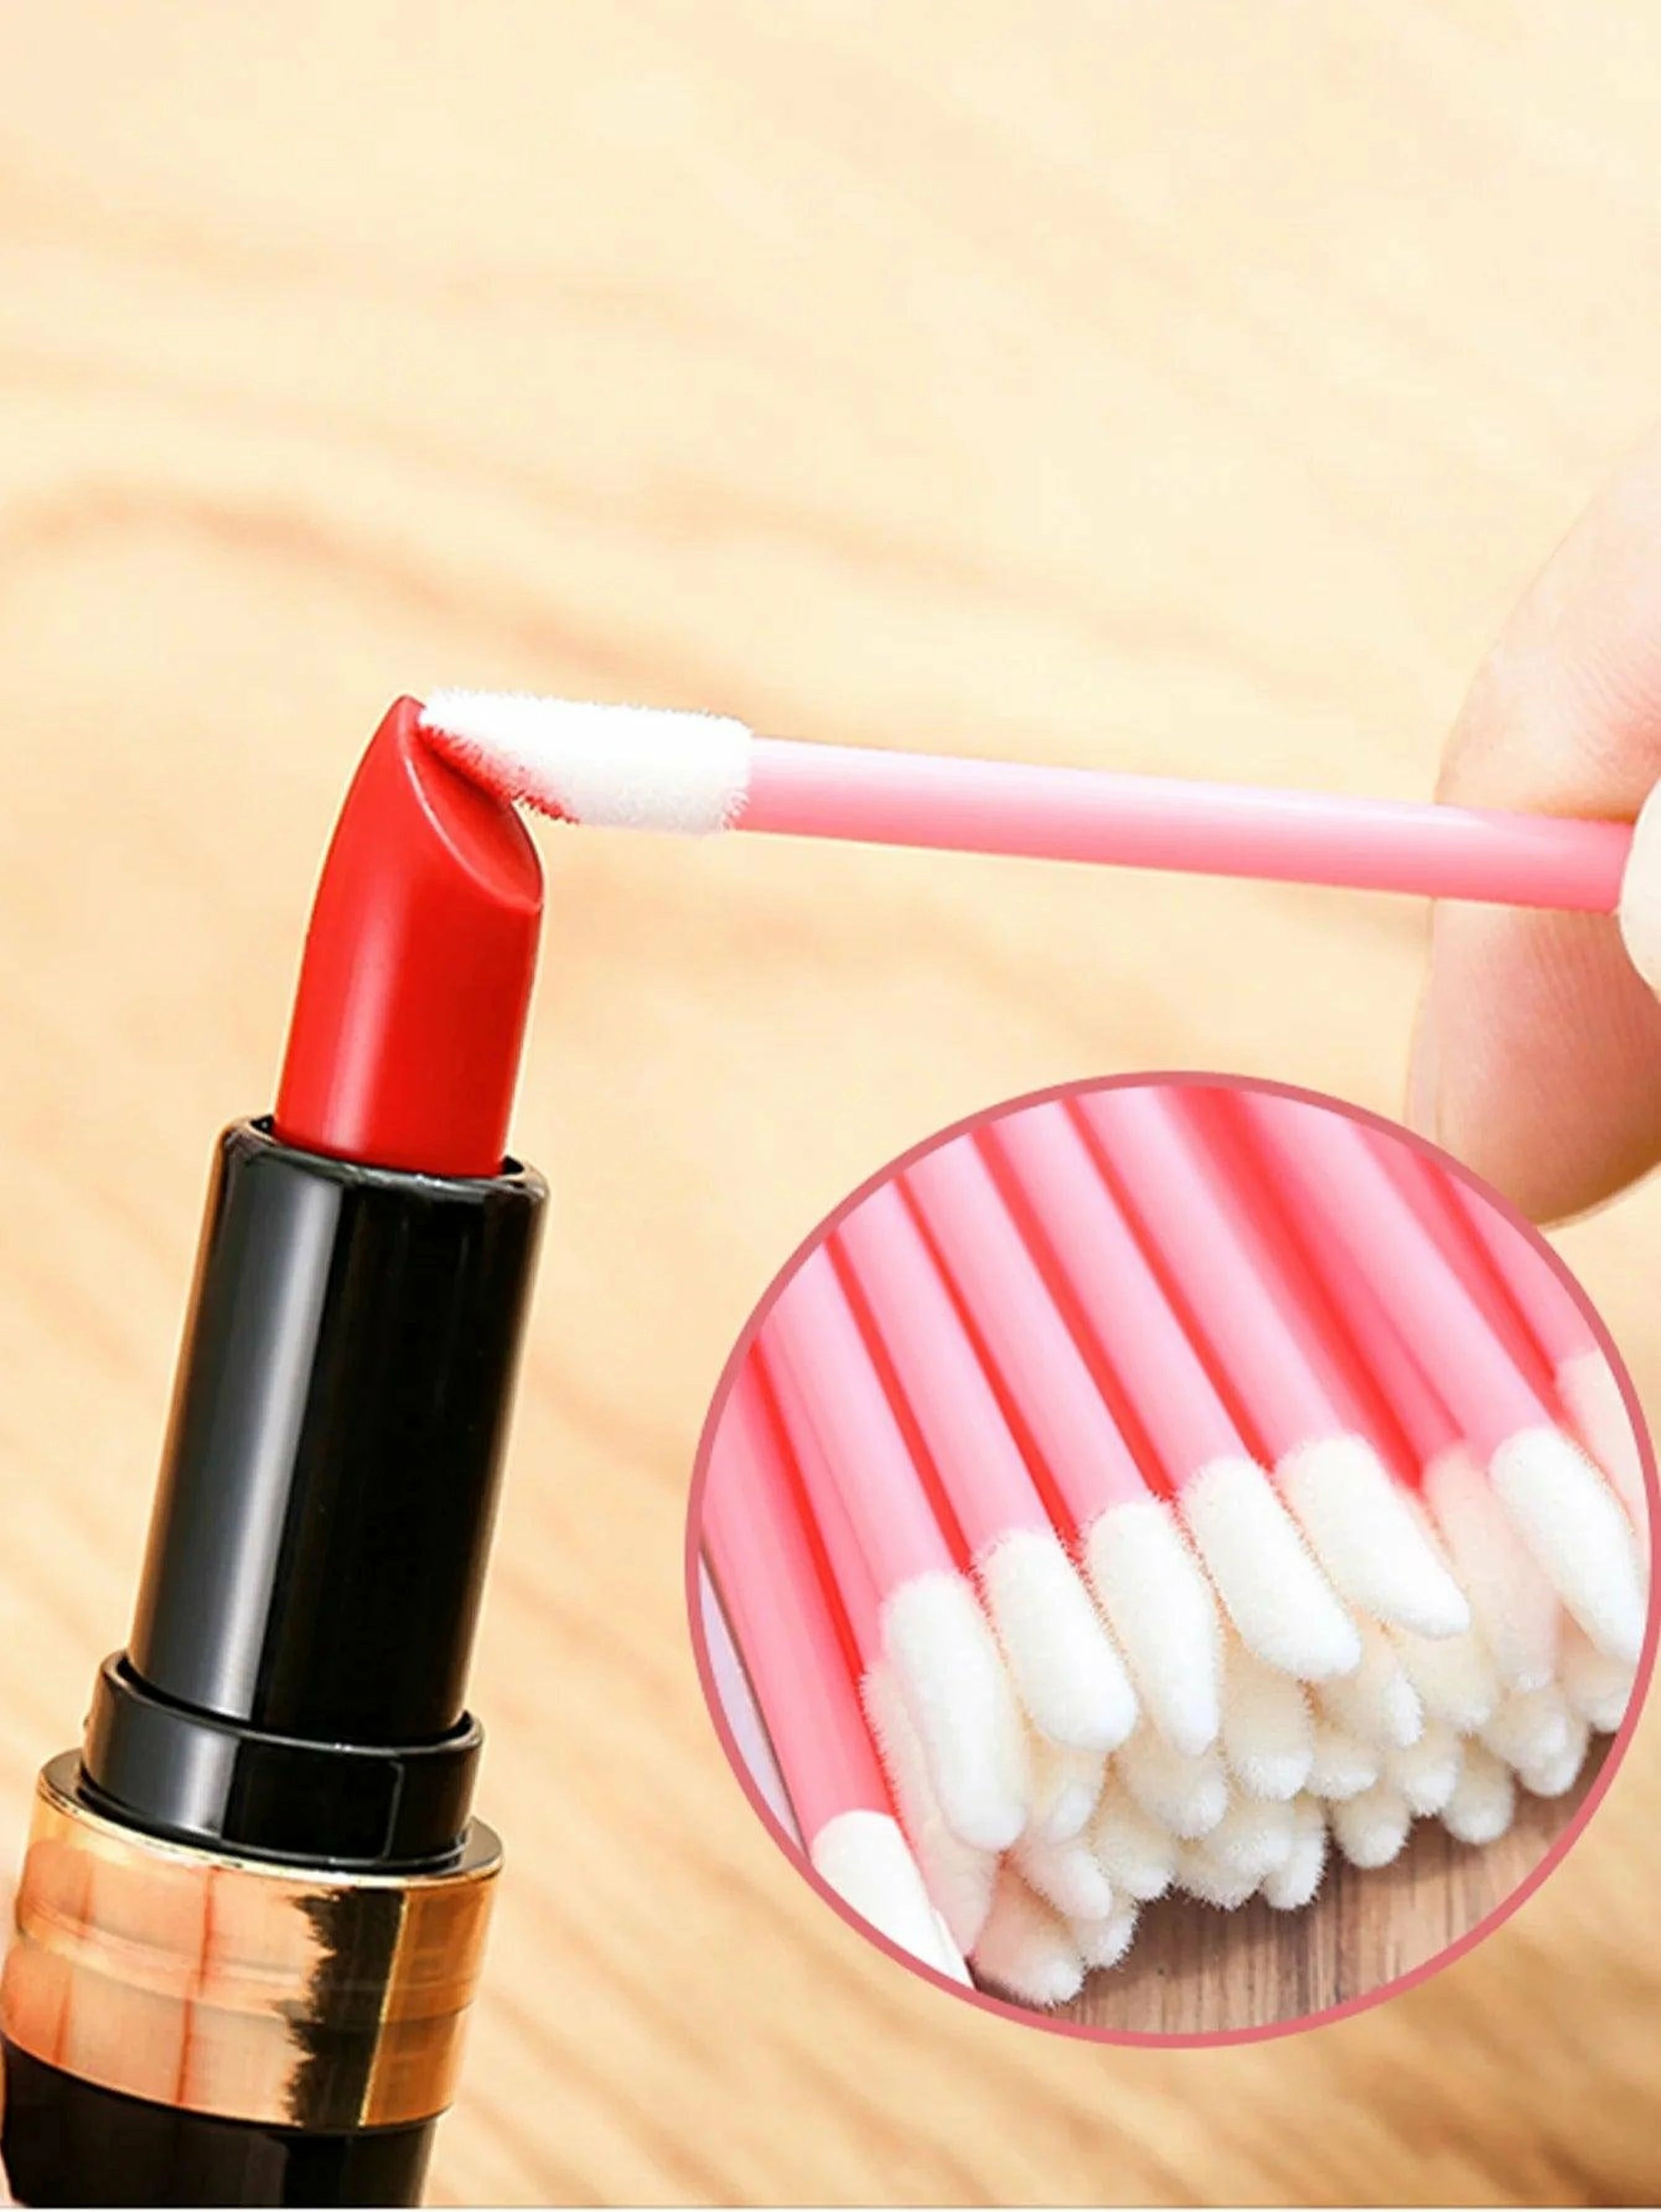 100 Disposable Lip Brushes: For makeup application.